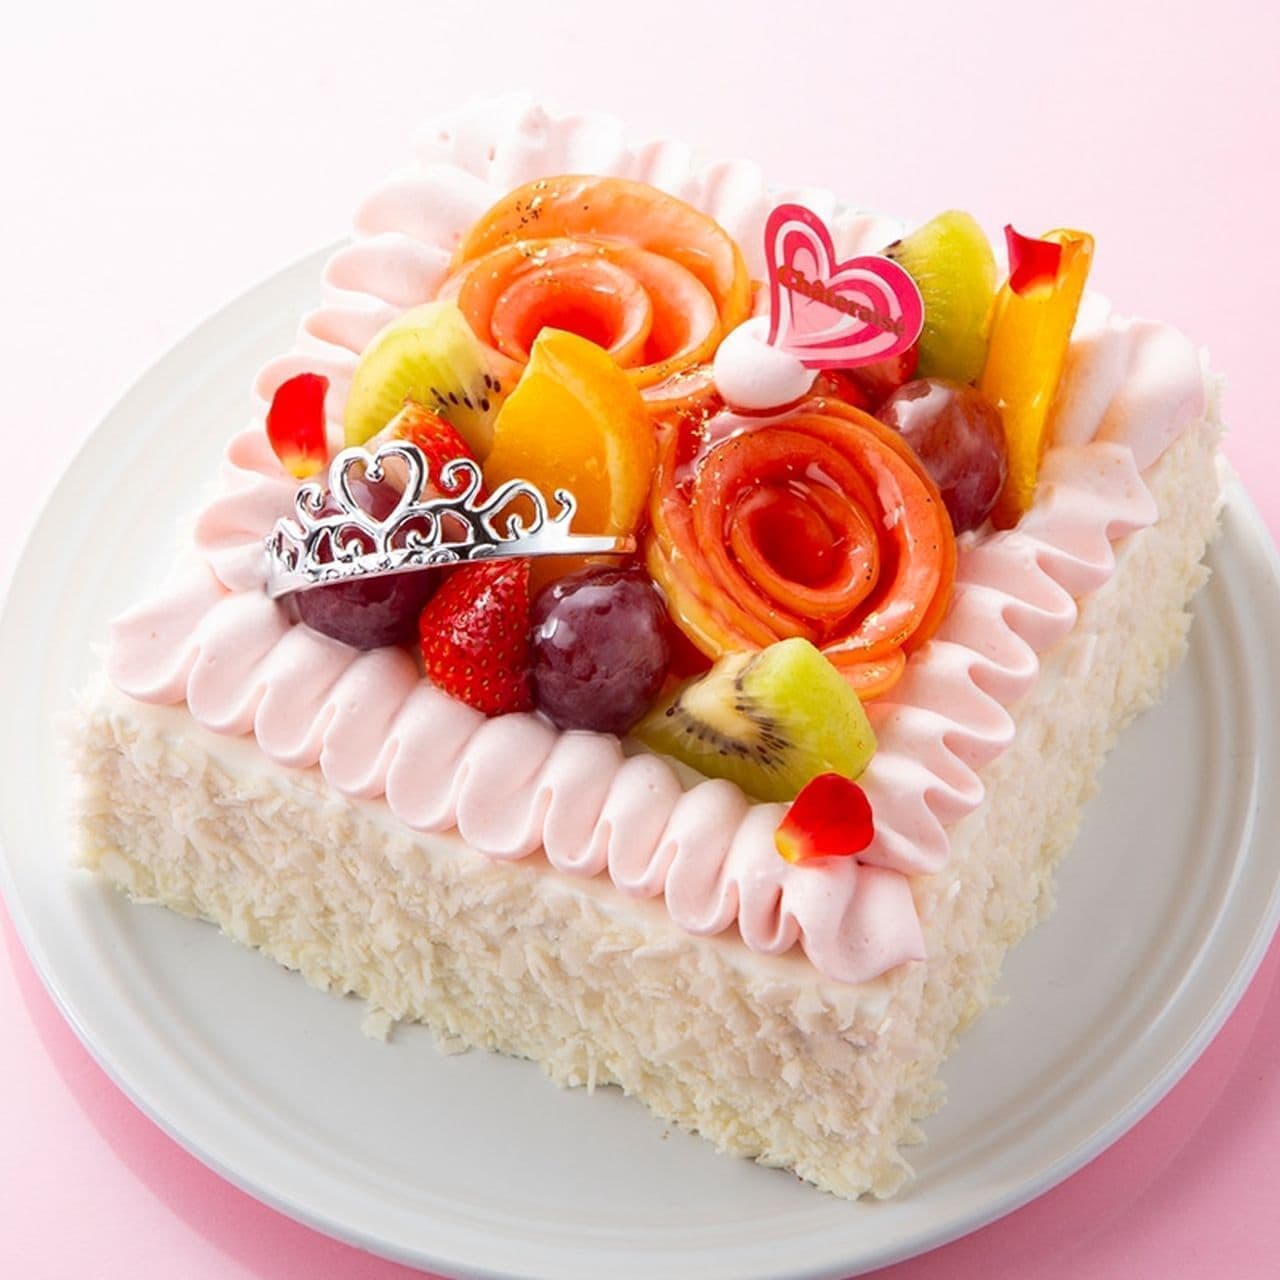 Shateraise "Sweet Fruit Decoration for Good Marriage Day